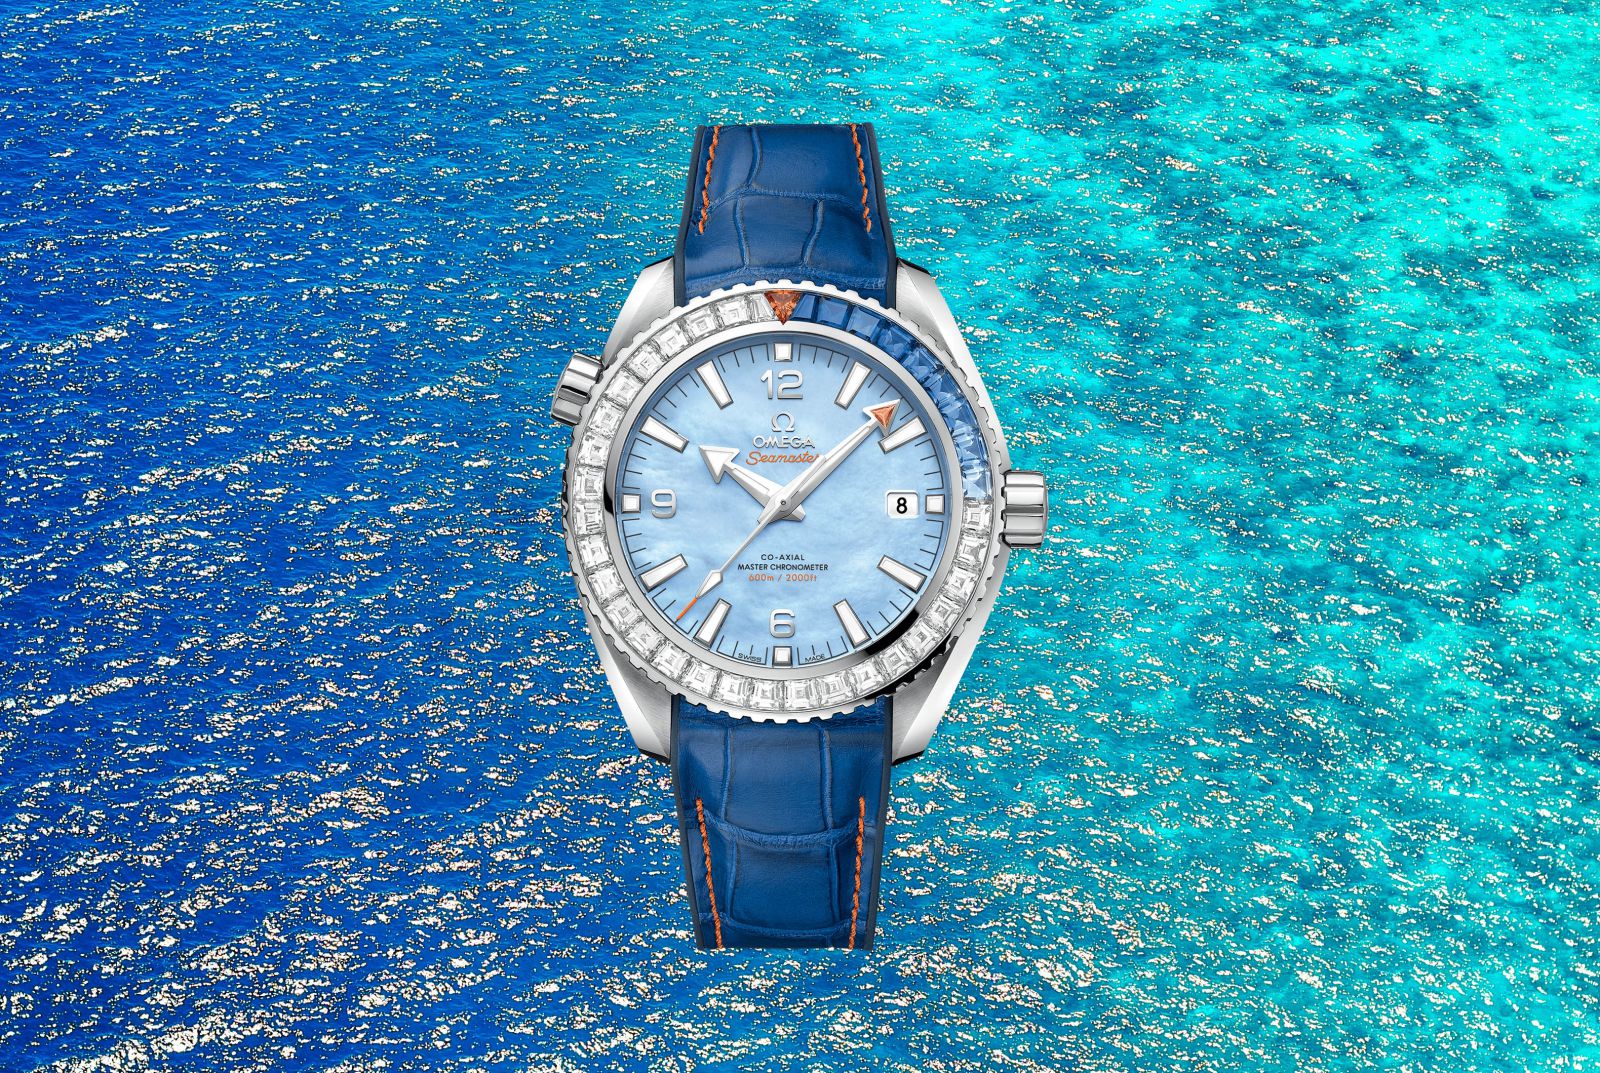 Planet Ocean 600M Co-Axial Master Chronometer 215.58.44.21.07.001